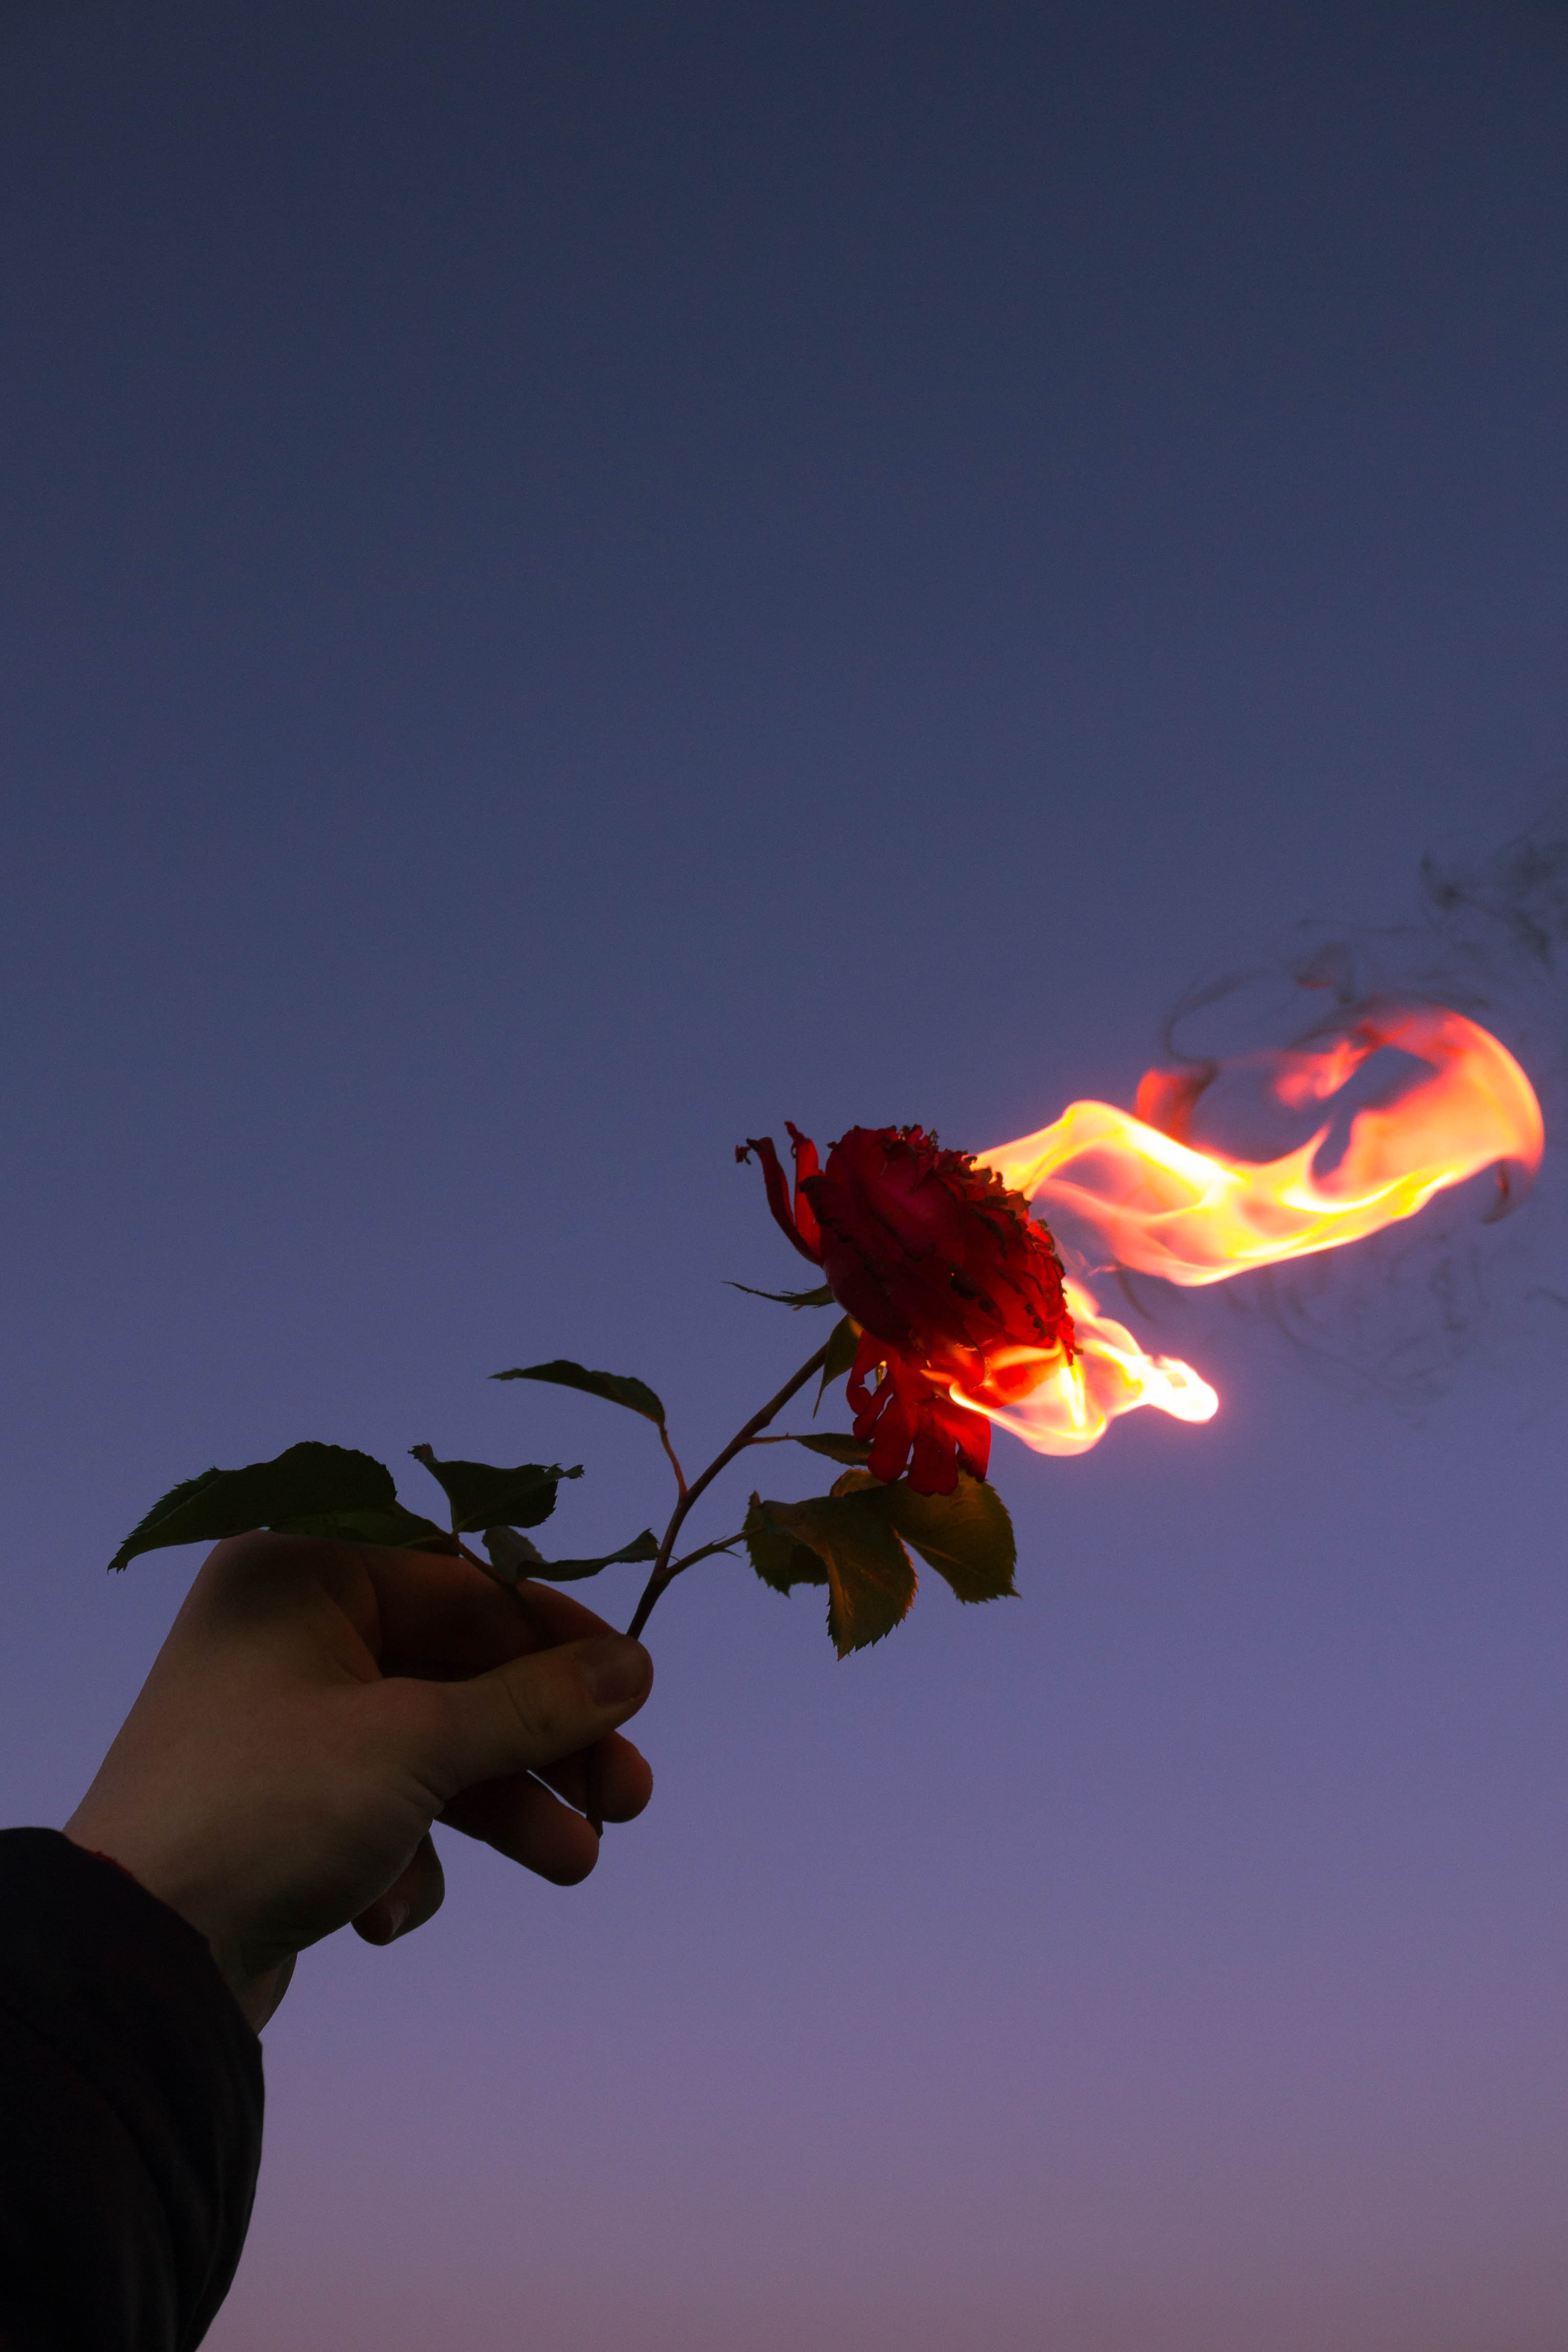 Free HD rose, hand, fire, rose flower, miscellanea, flower, flame, miscellaneous